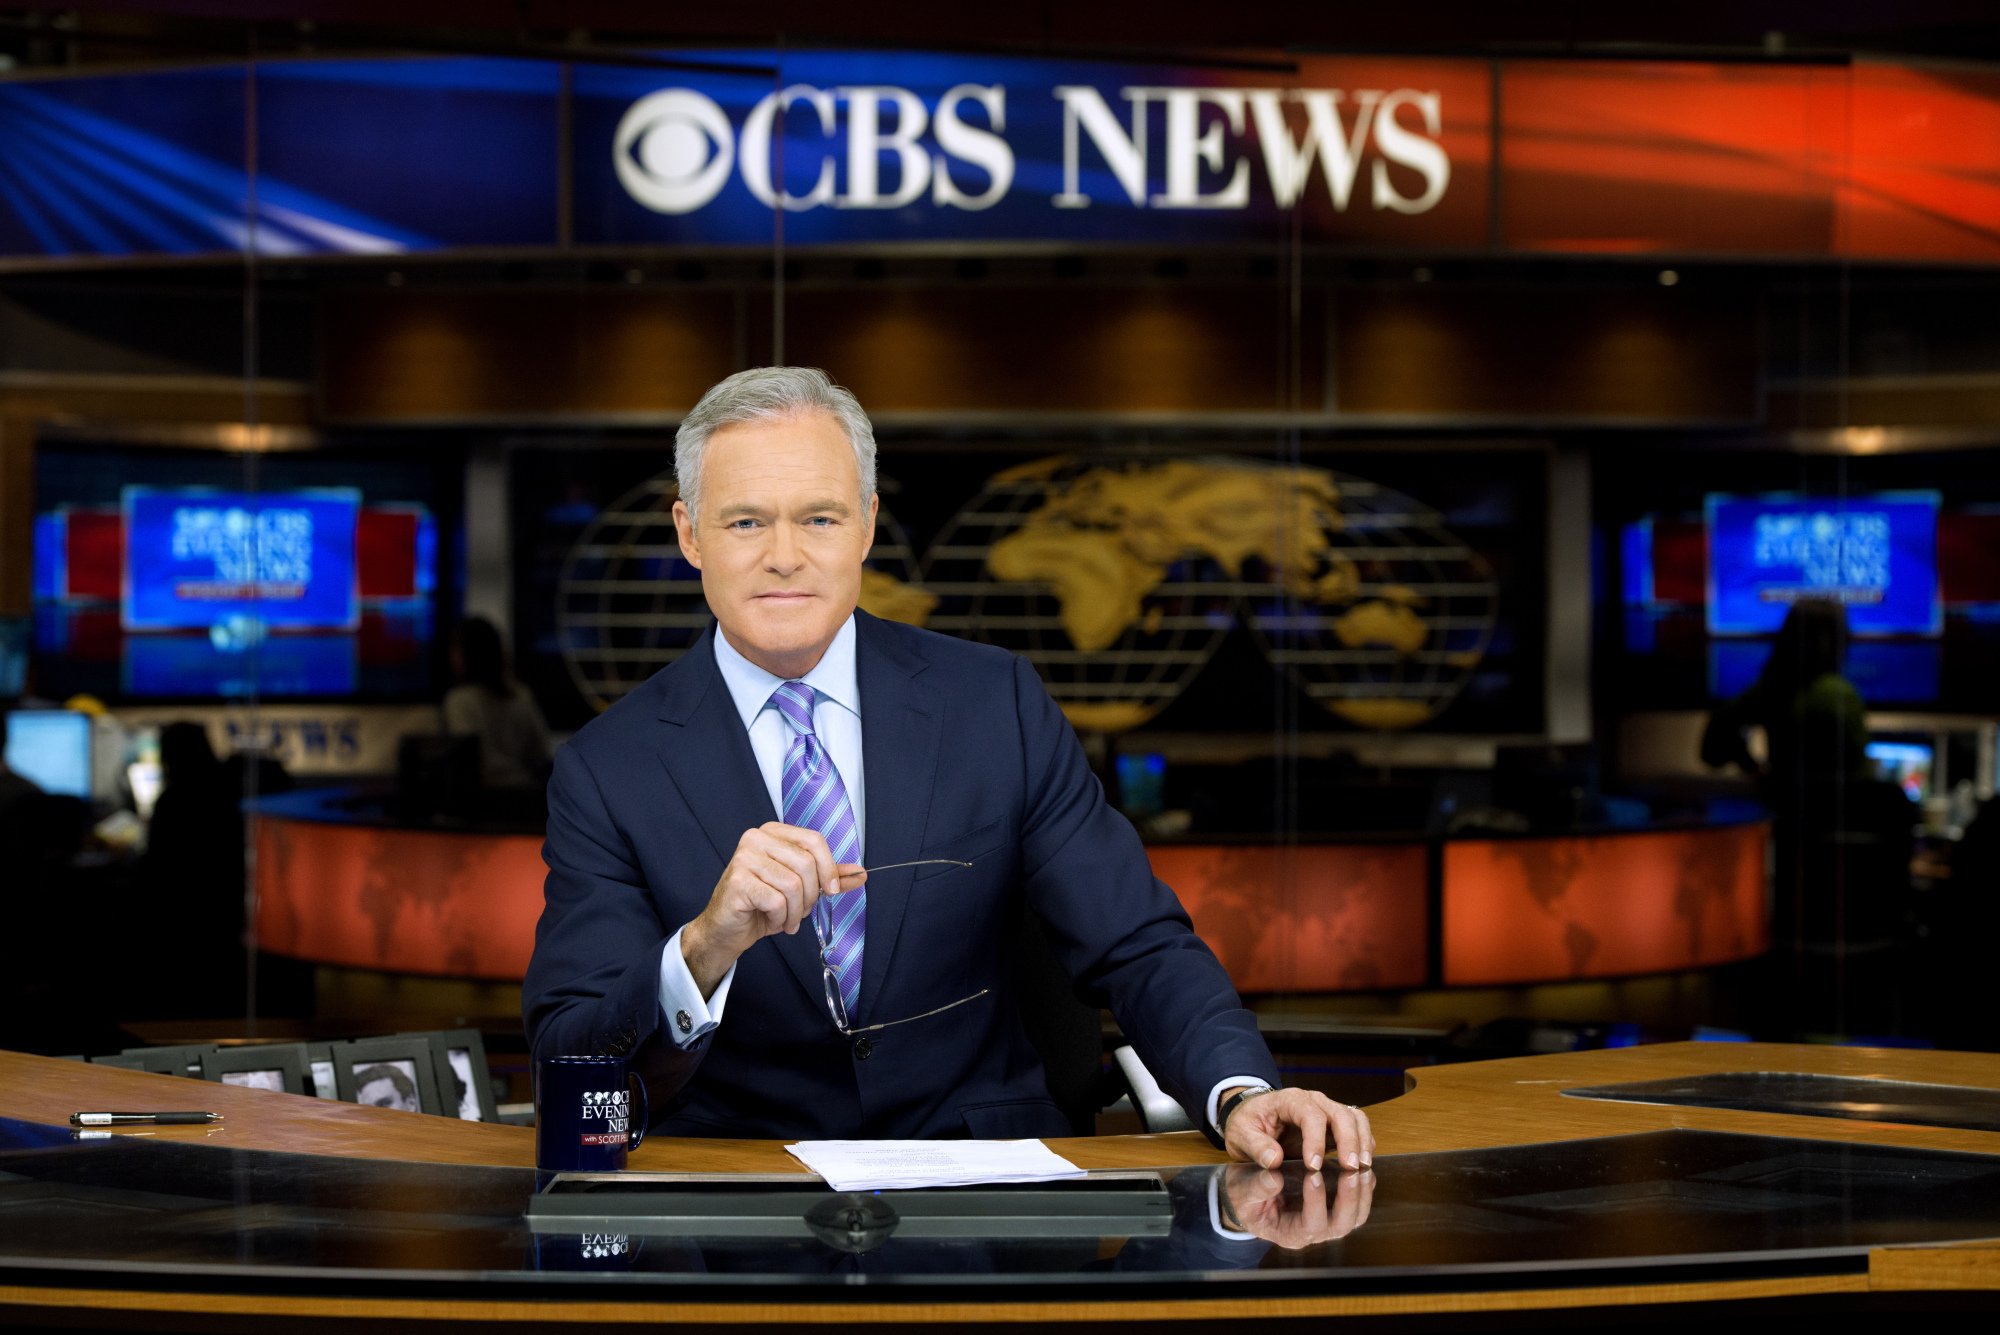 CBS Evening News Anchor and Managing Editor Scott Pelley in New York on January 17, 2014. | Source: Getty Images.